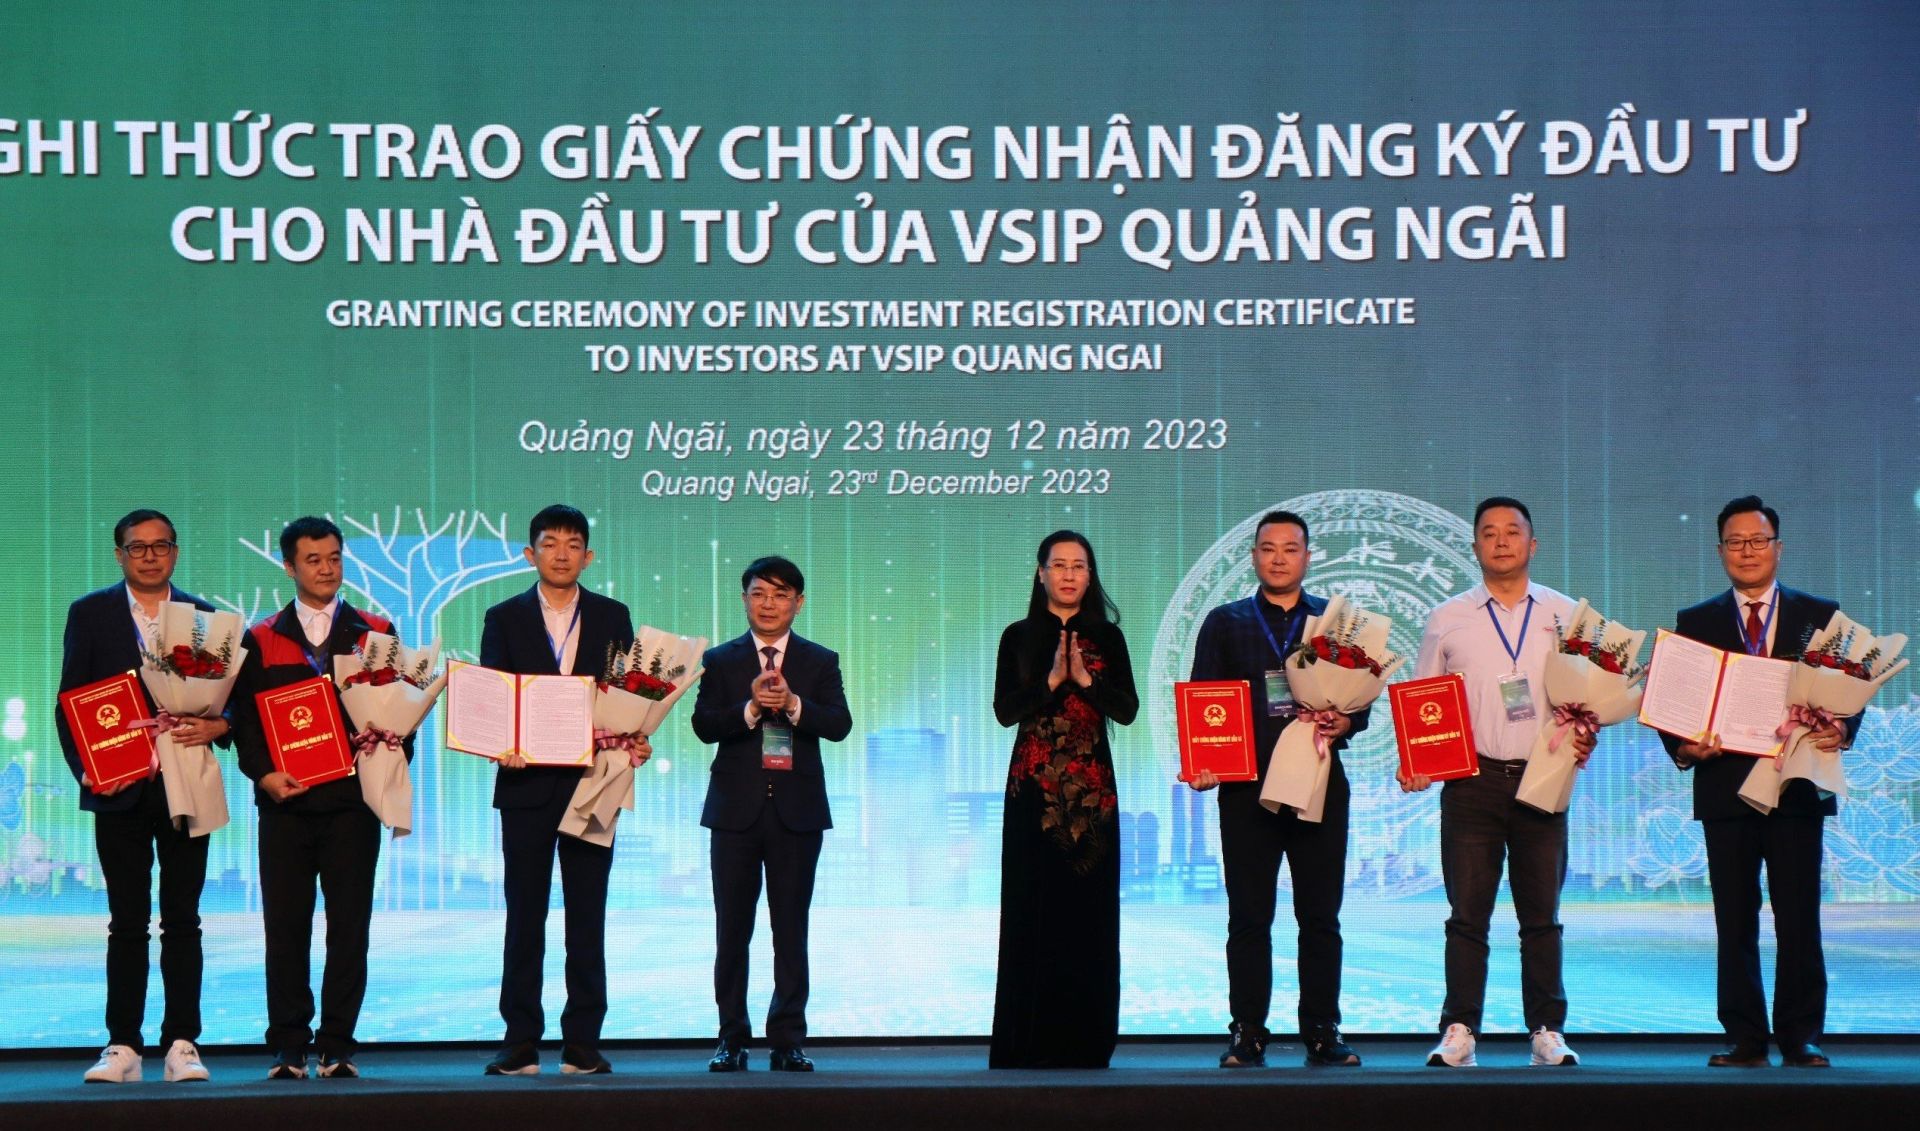 At the ceremony, Quang Ngai province granted investment registration certificates to 4 new projects in VSIP Quang Ngai Industrial Park in 2023 with a total registered capital of about 69.3 million USD